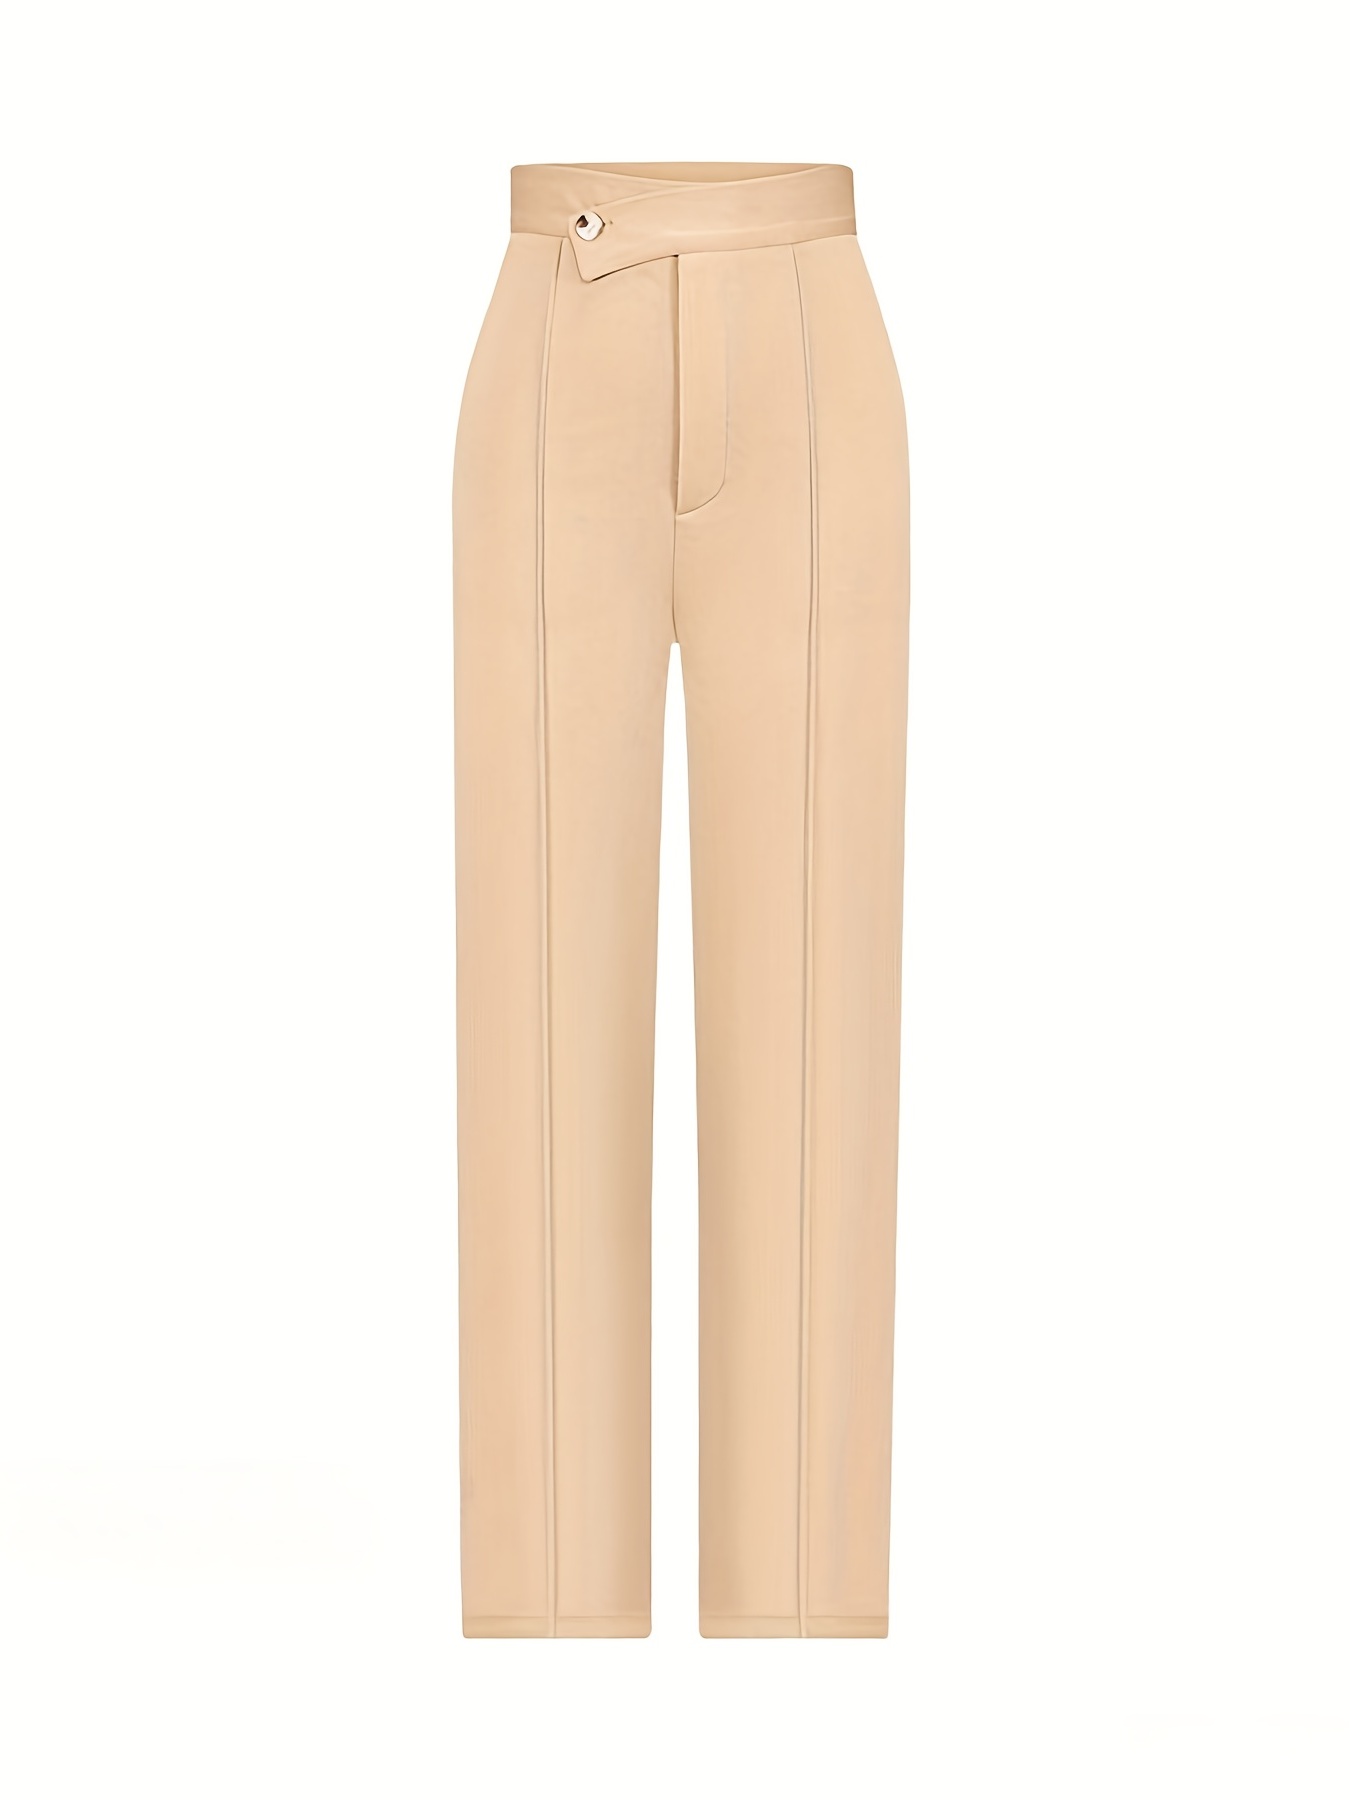 Solid Slant Pockets Tailored Pants  Tailored pants, Pants for women, Tailored  pants women